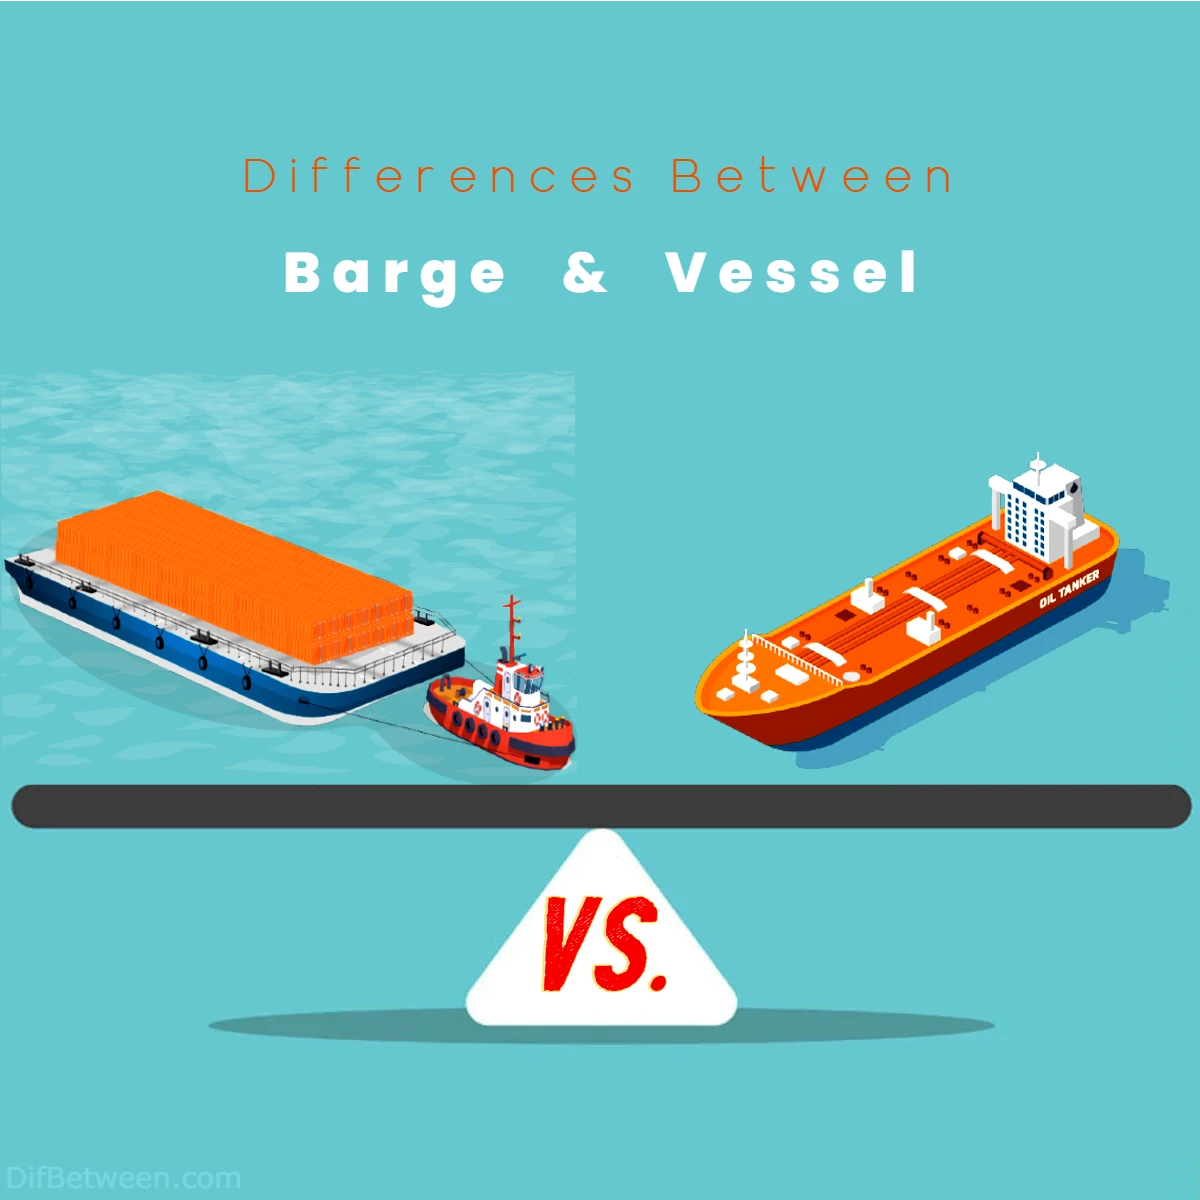 Differences Between Barge vs Vessel